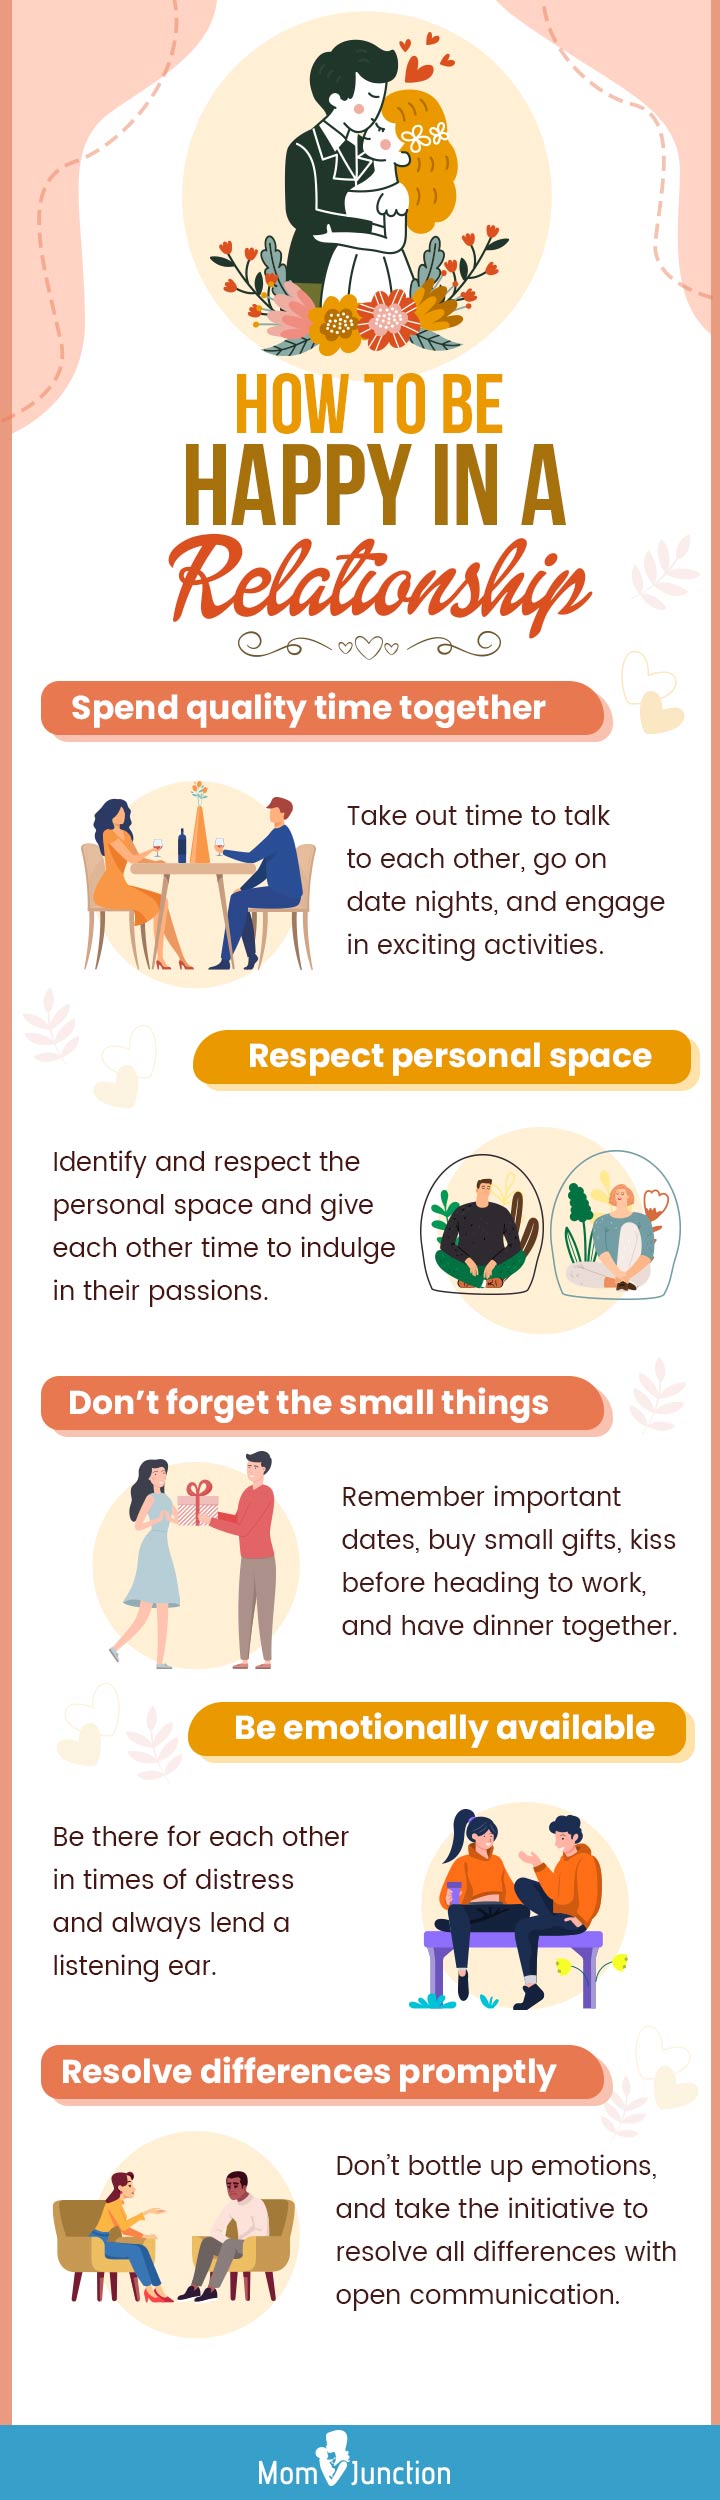 how to be happy in a relationship (infographic)